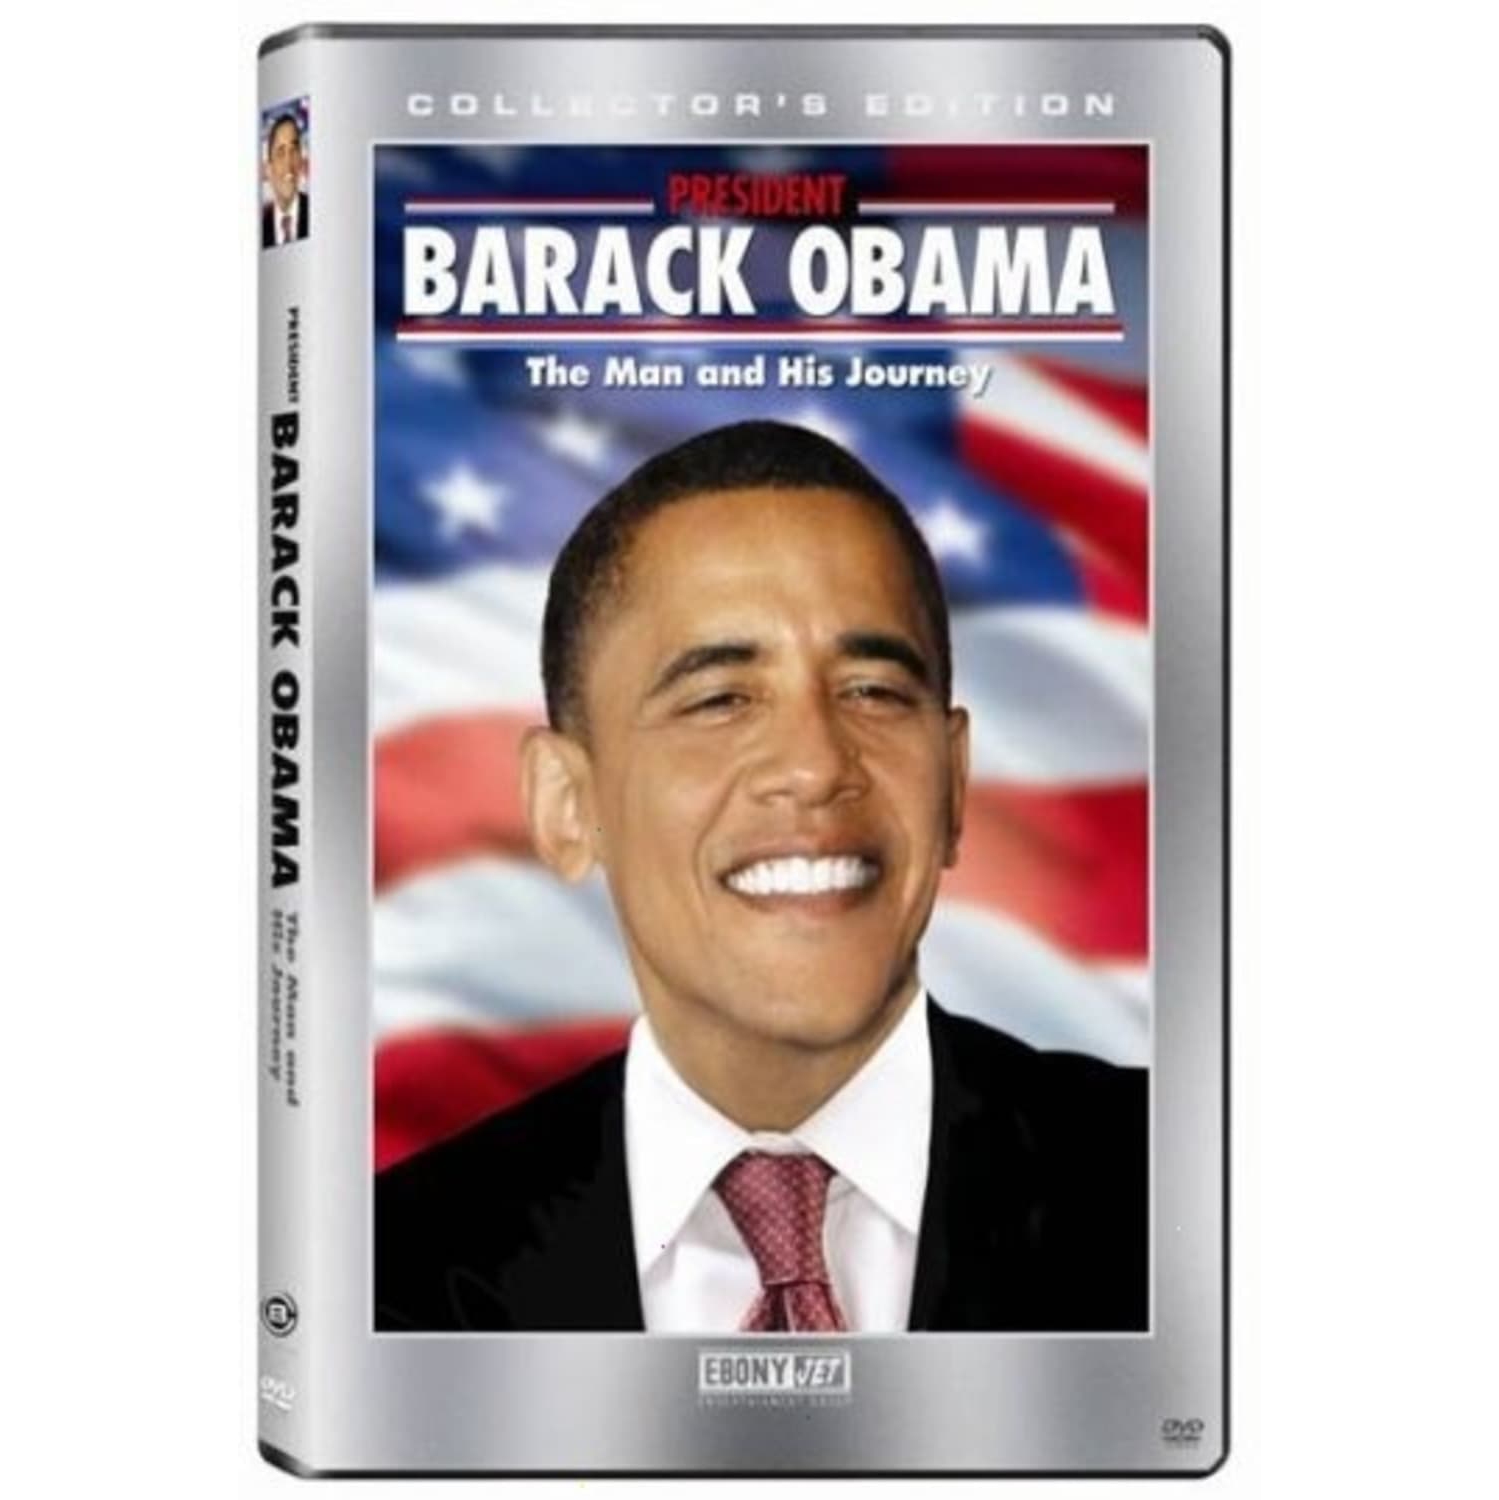 President Barack Obama: The Man and His Journey (DVD)